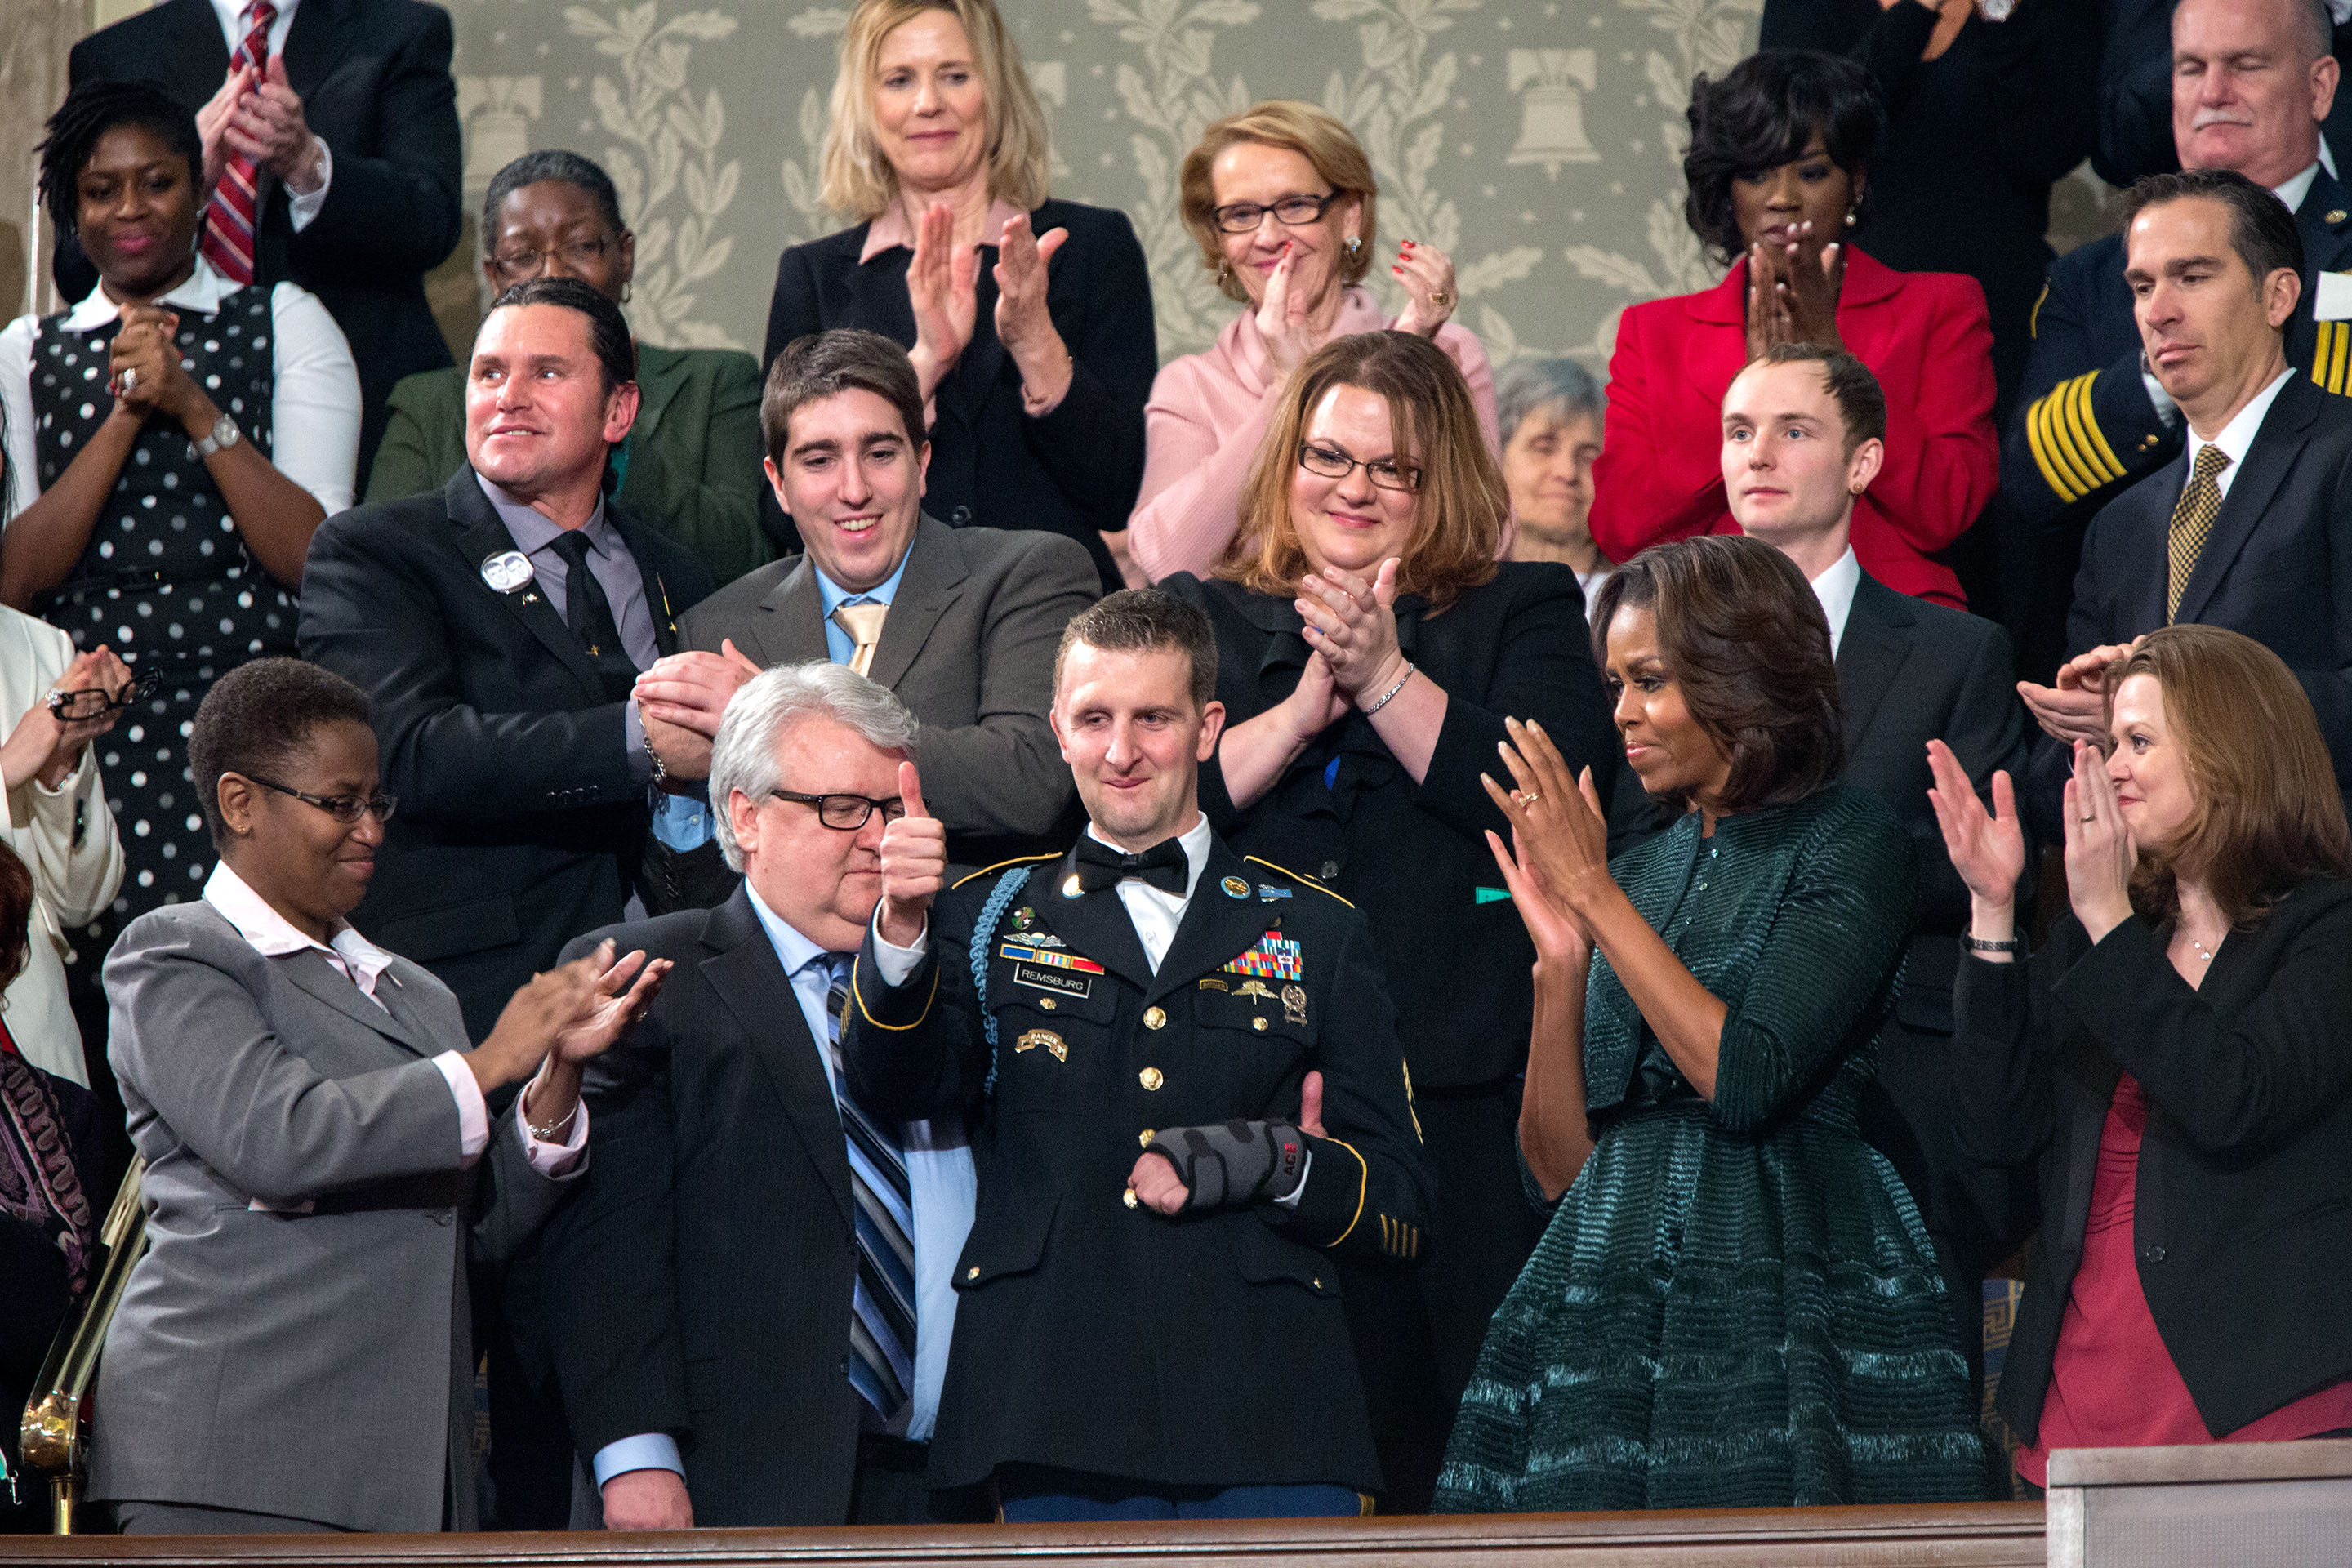 Jan. 28, 2014: Cory reacts after the President paid tribute to him during the State of the Union Address. (Official White House Photo by Pete Souza)